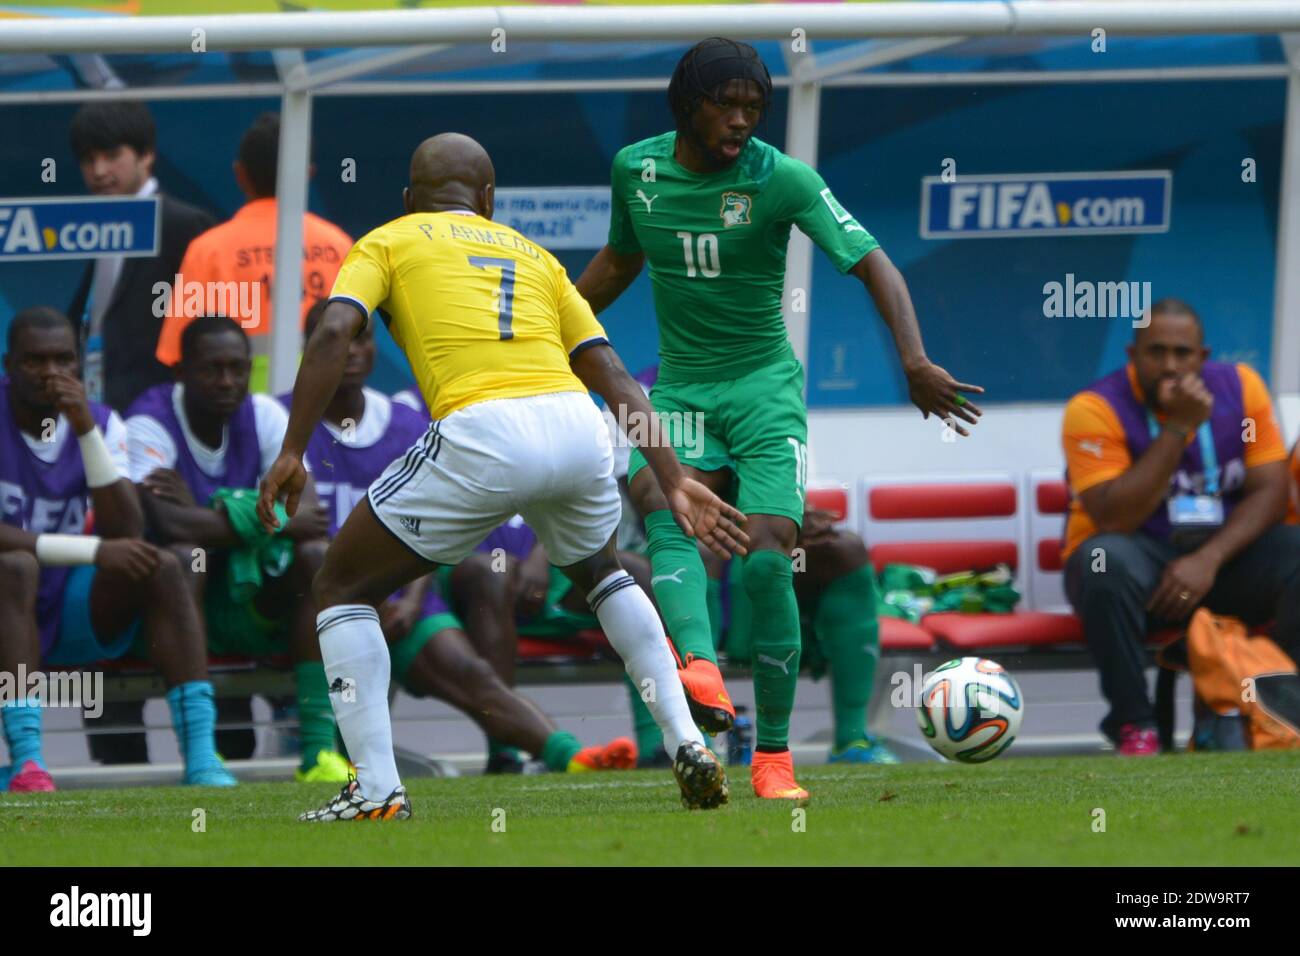 Colombia's Pablo Armero battling Ivory Coast's Gervinho during soccer World Cup 2014 First round Group D match Colombia v Ivory Coast at National Stadium, Brasilia, Brazil , on June 19, 2014. Colombia won 2-1. Photo by Henri Szwarc/ABACAPRESS.COM Stock Photo